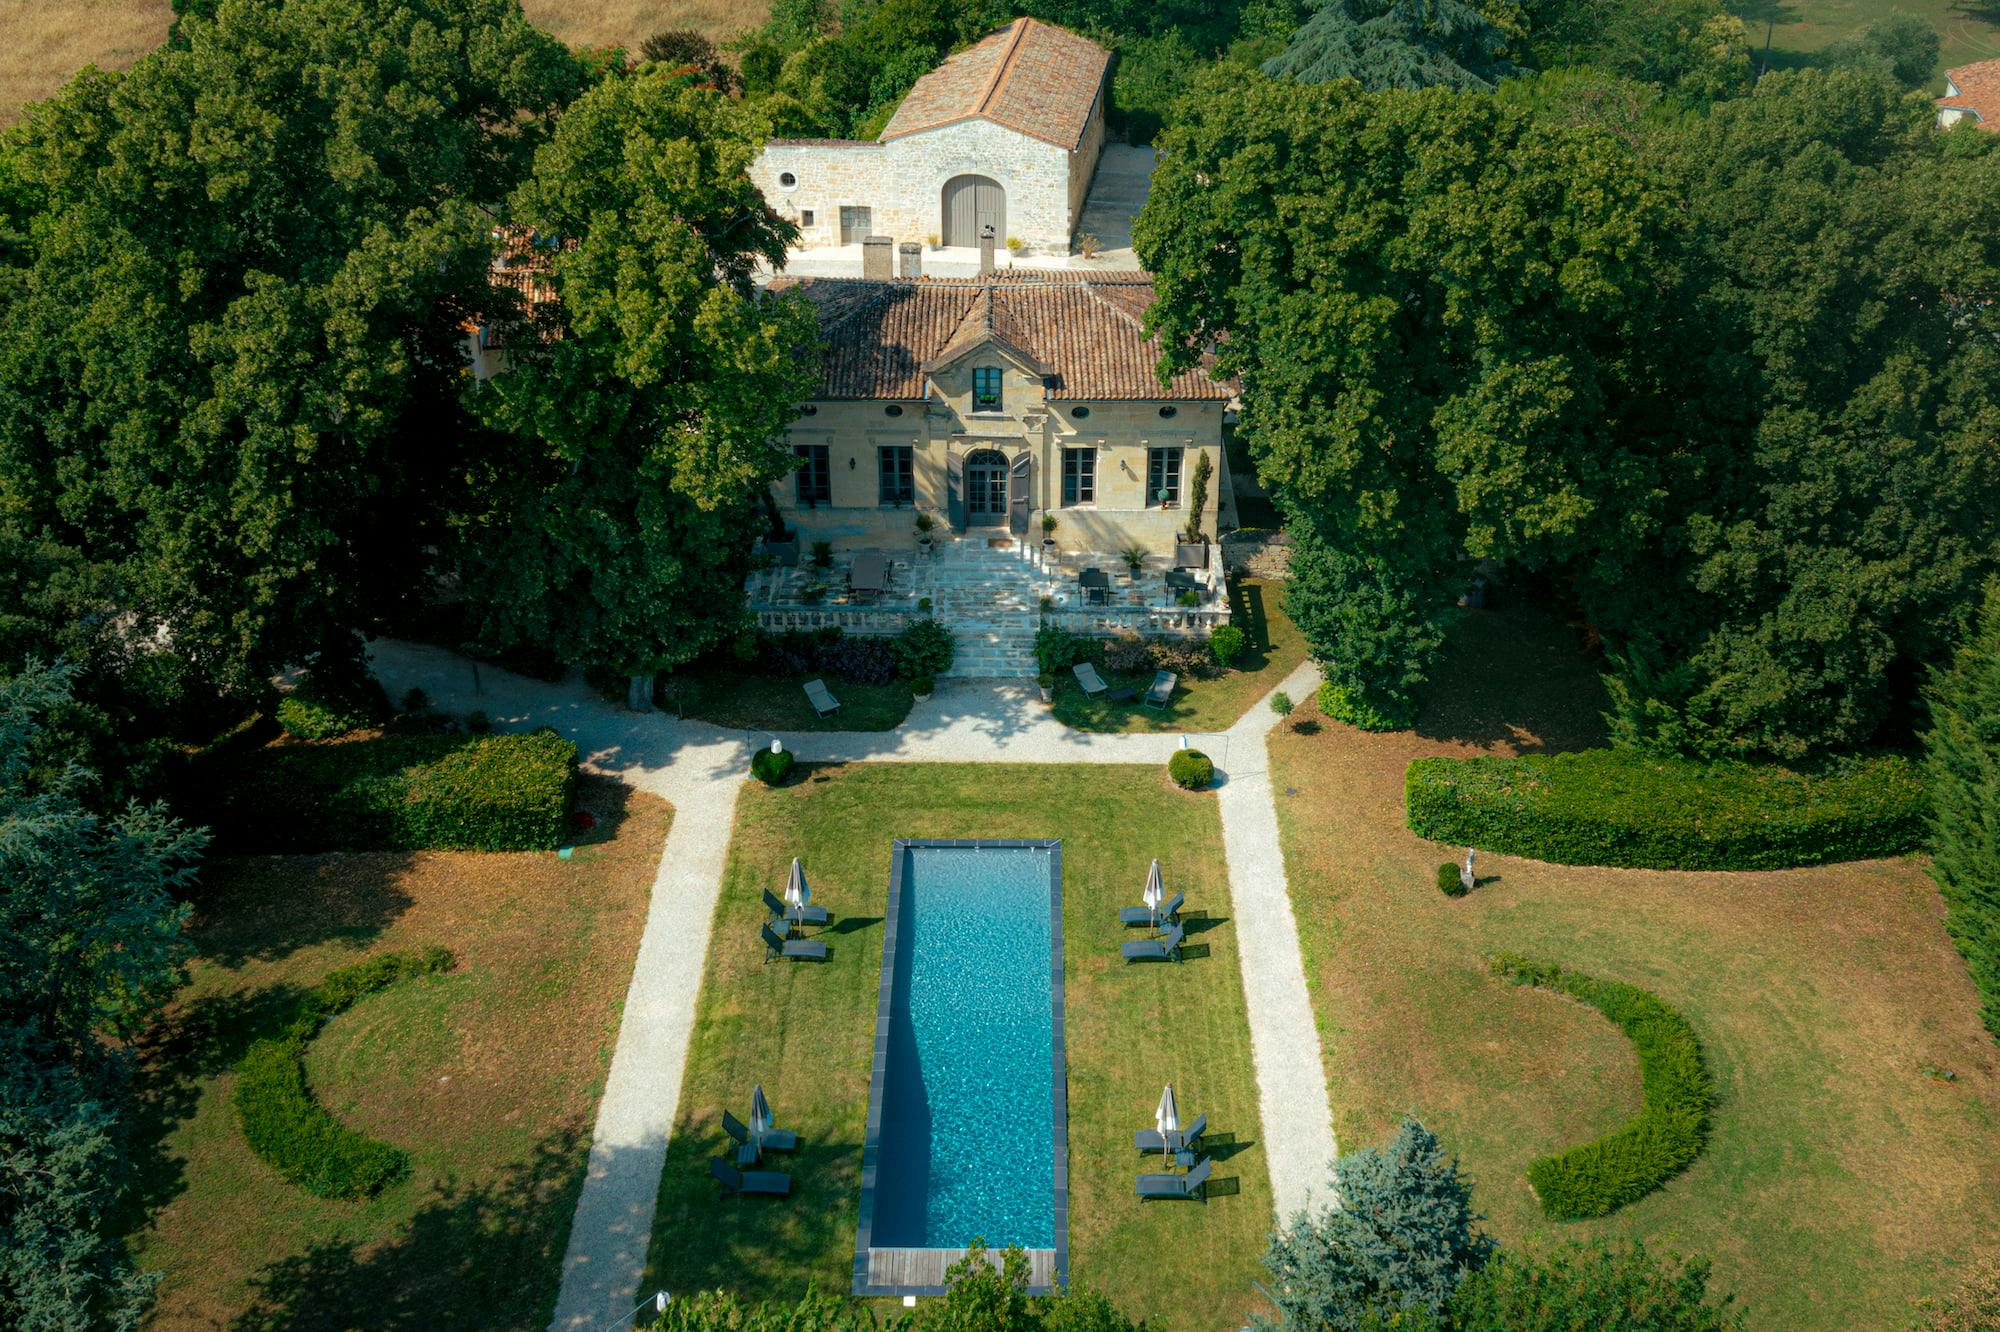 Aerial view of the Clos Marcamps estate with its swimming pool, manor house and outbuildings